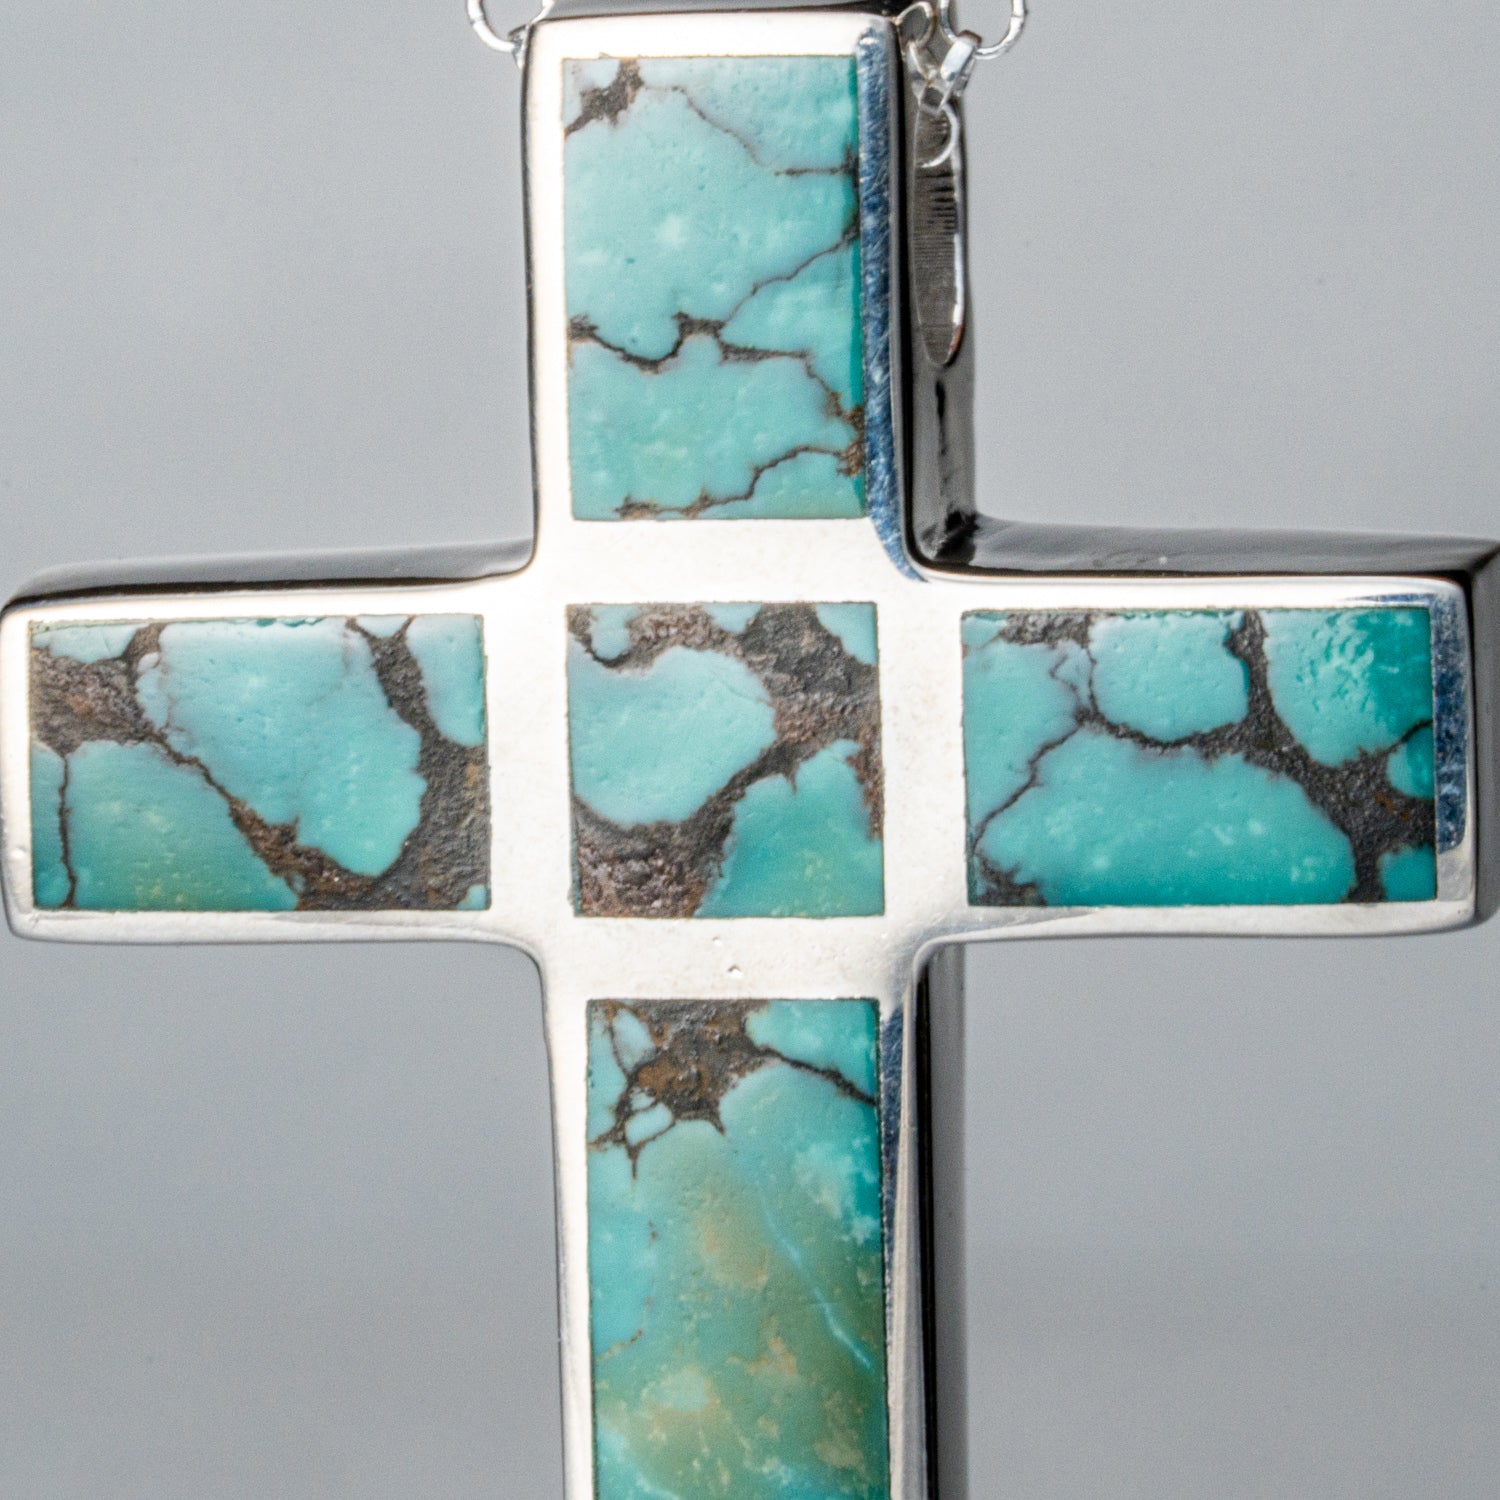 Genuine Turquoise Sterling Silver Cross Pendant with 18" Sterling Silver Necklace